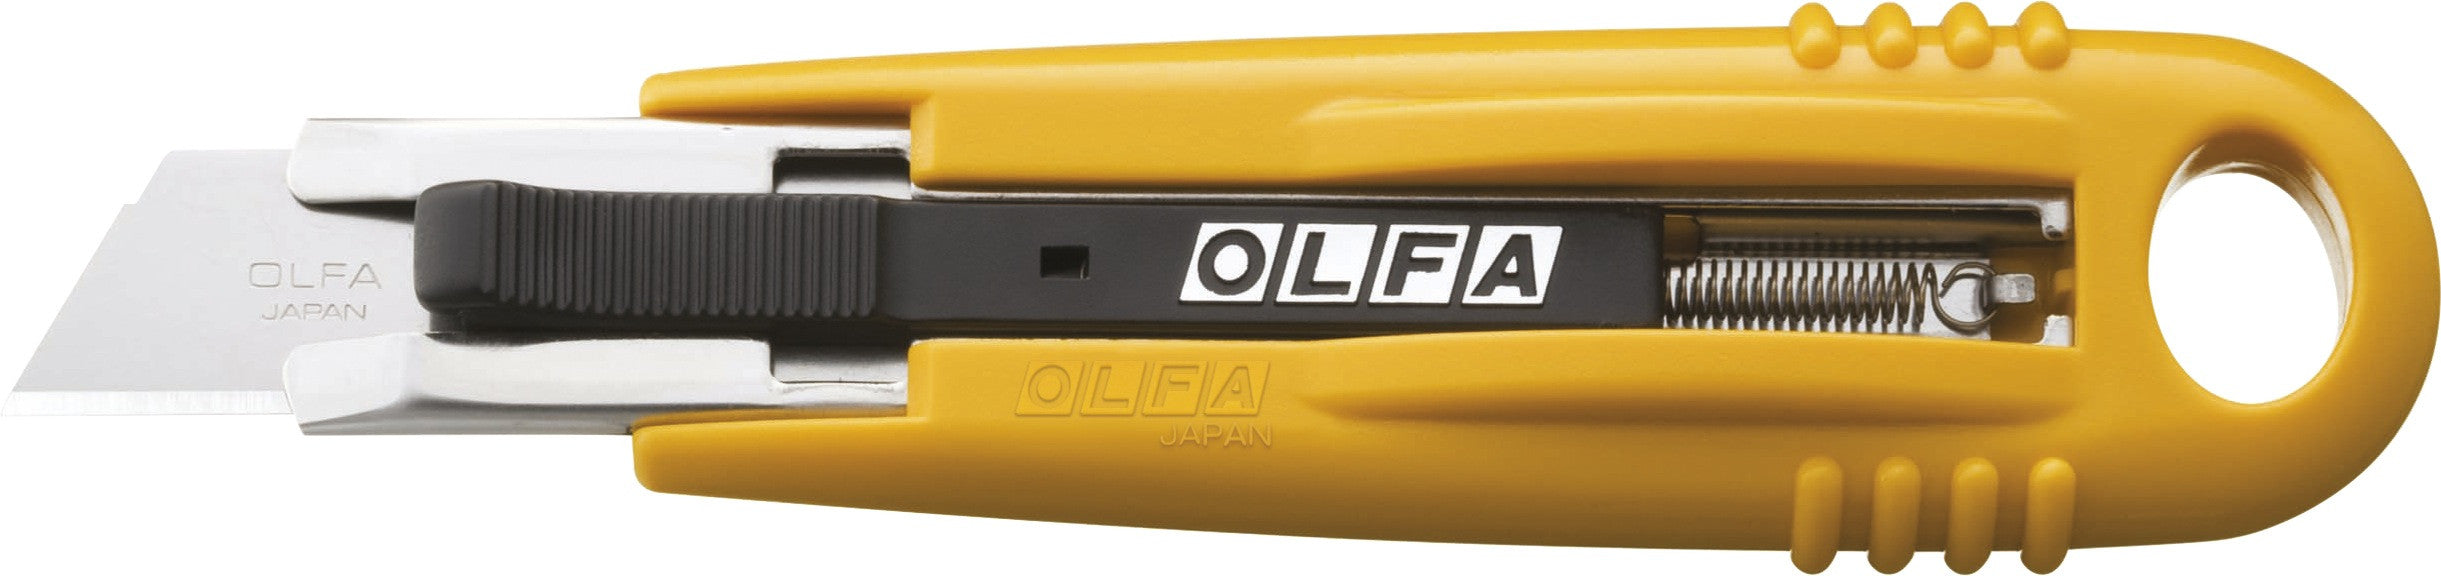 Olfa cutter antinfortunistico art. sk-4 ITW CONSTRUCTION PRODUCT